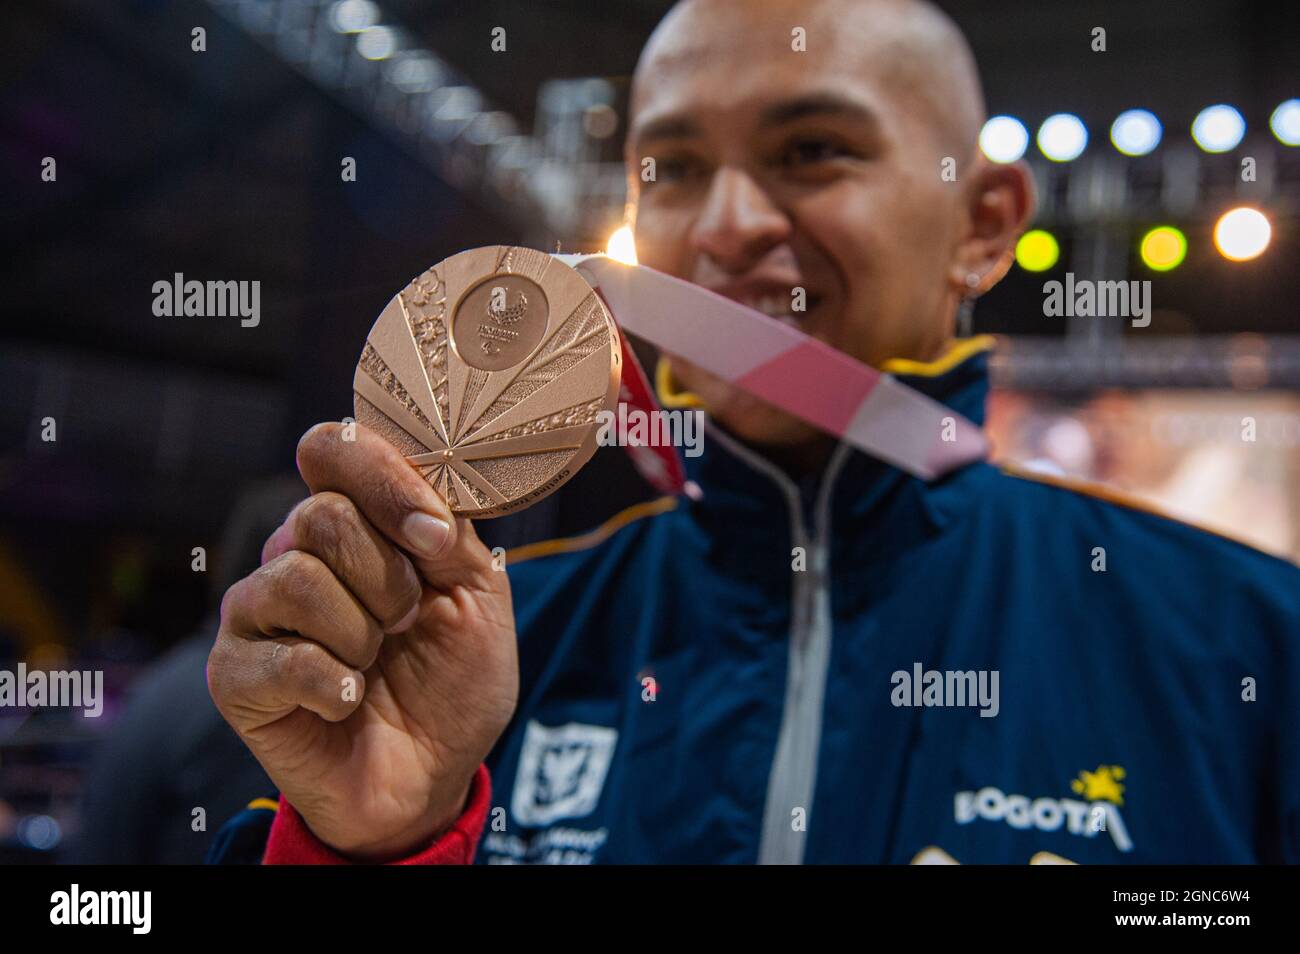 Diego Dueñas, Paracycling bronze medallist poses for a photo with his medal during a welcoming event to Colombia's Paralympic athletes that participat Stock Photo